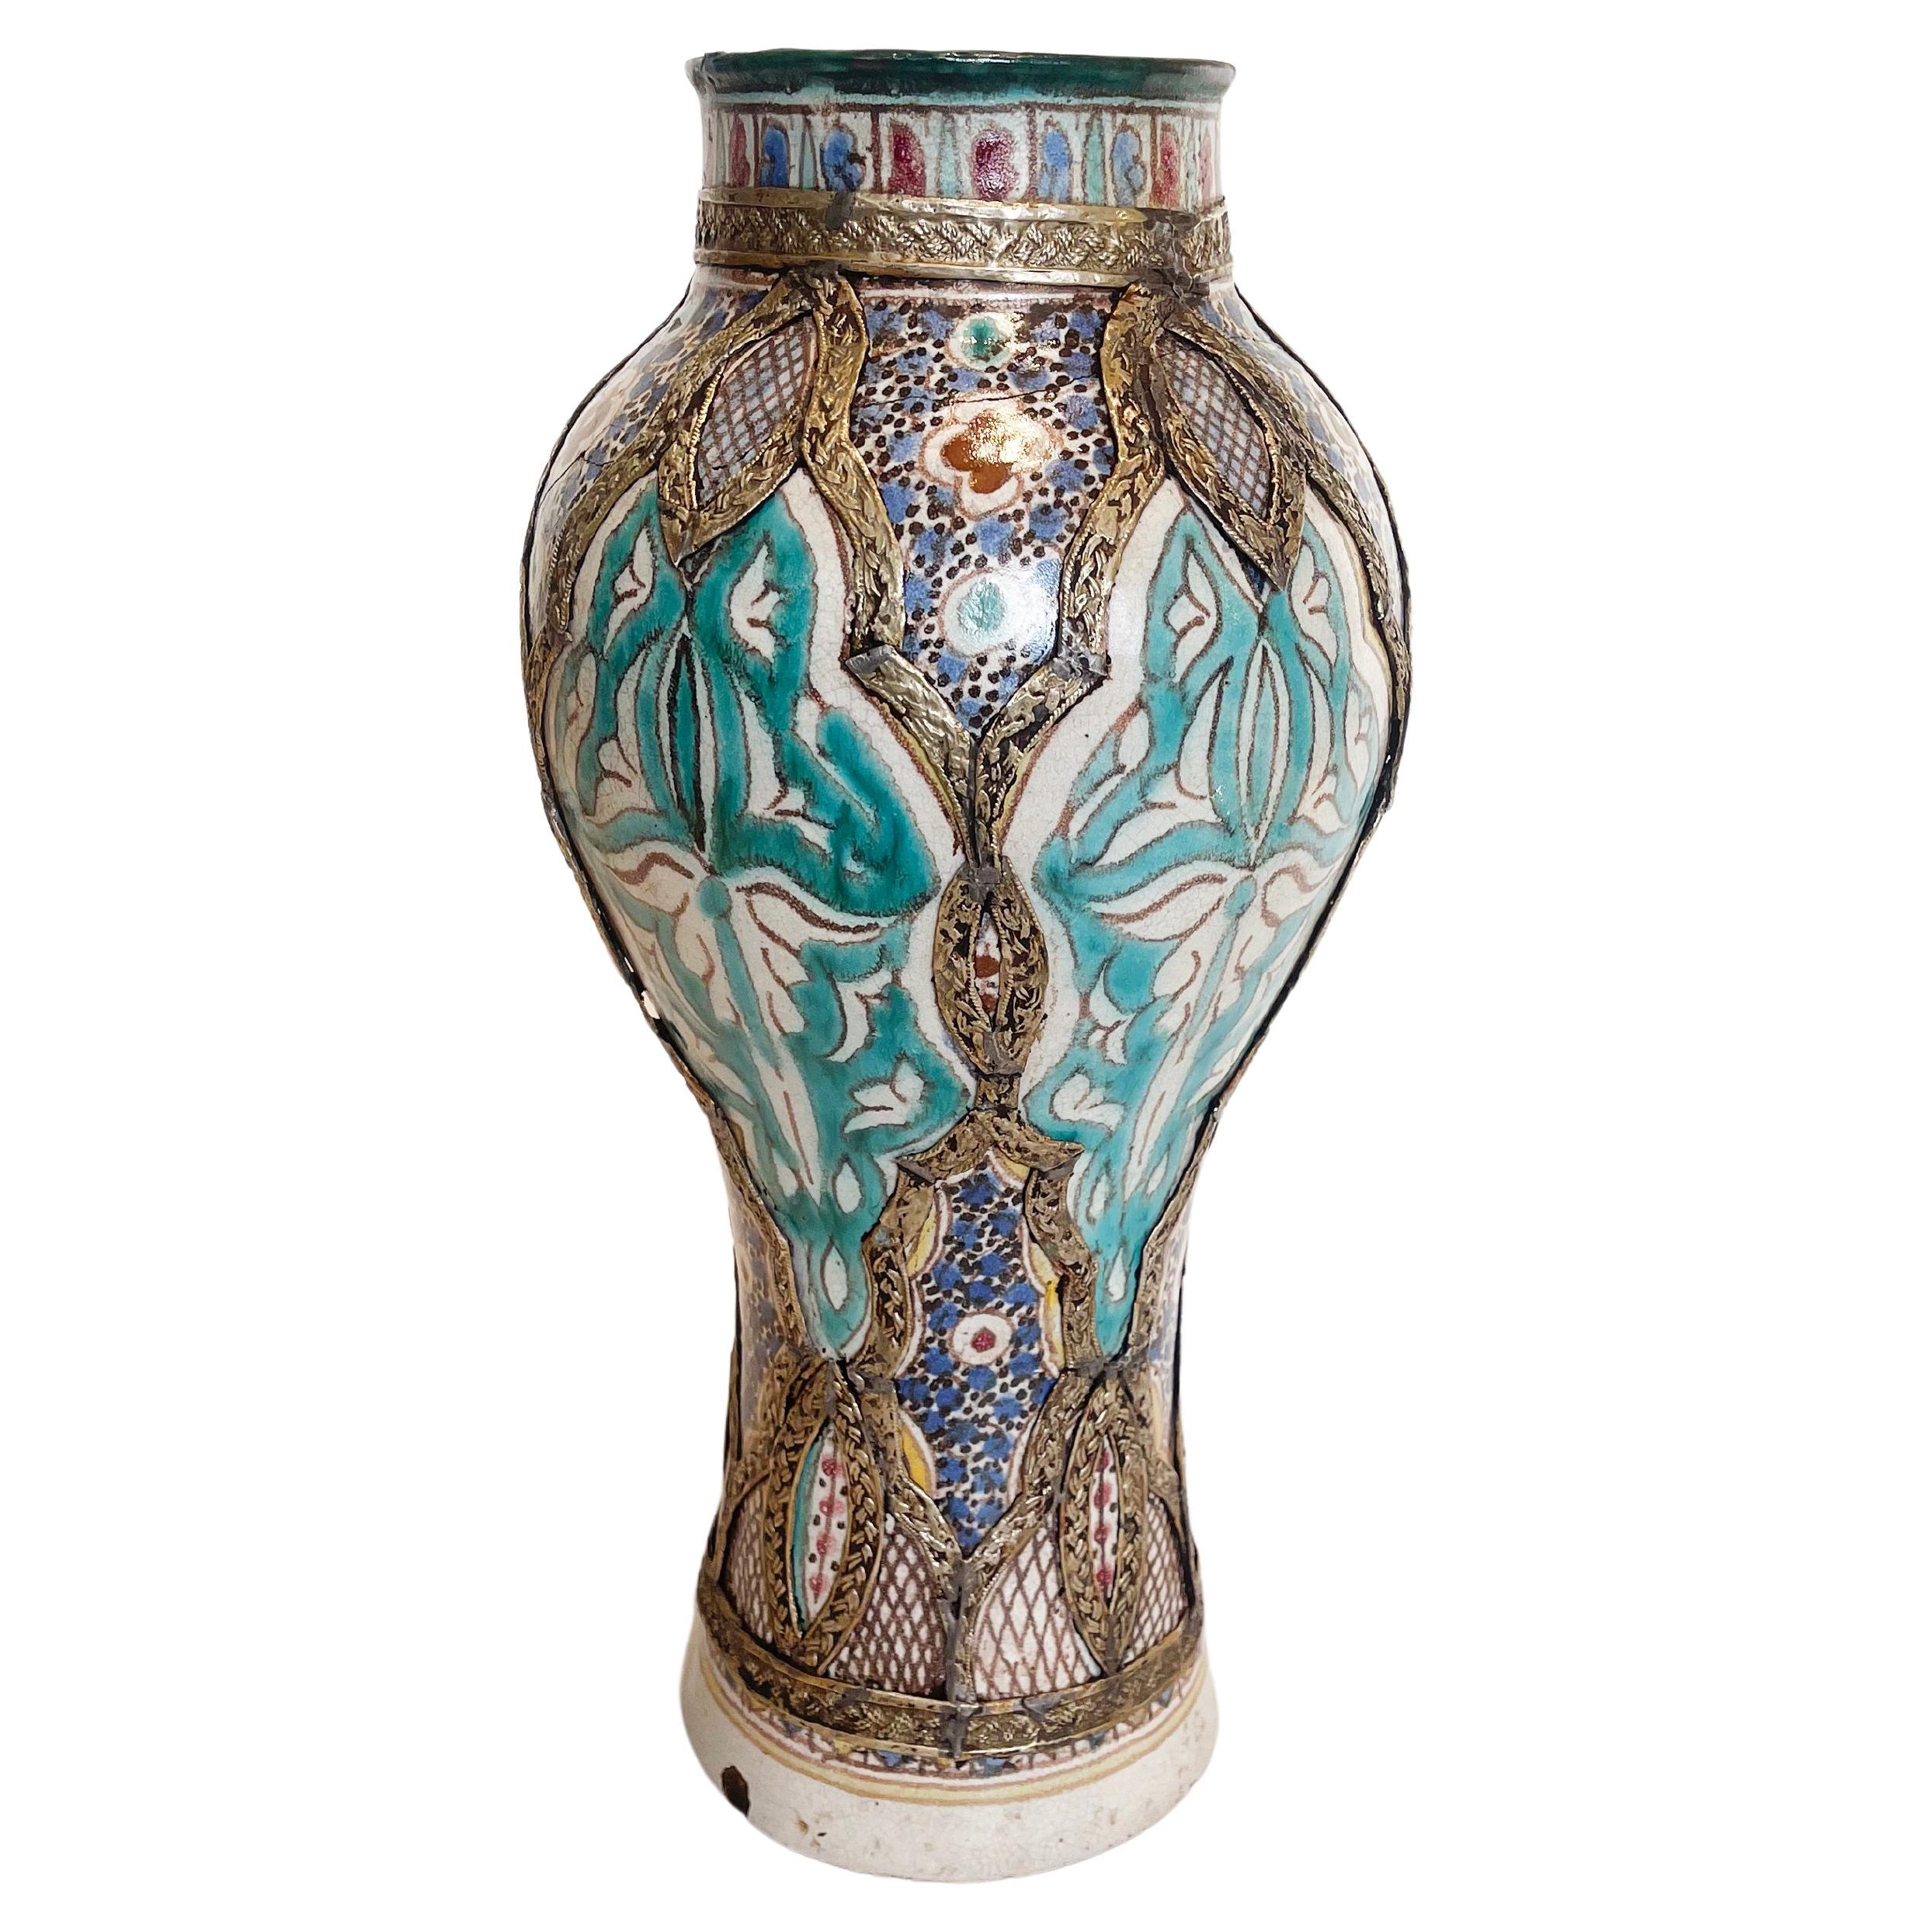 Fantastic colour combination with rather unusual nickel filigree decoration: beautiful vase from Morocco.
Fez was and still is famous for originating outstanding craftsmanship and beautiful artistic skill.
This vessel is beautifully hand painted in